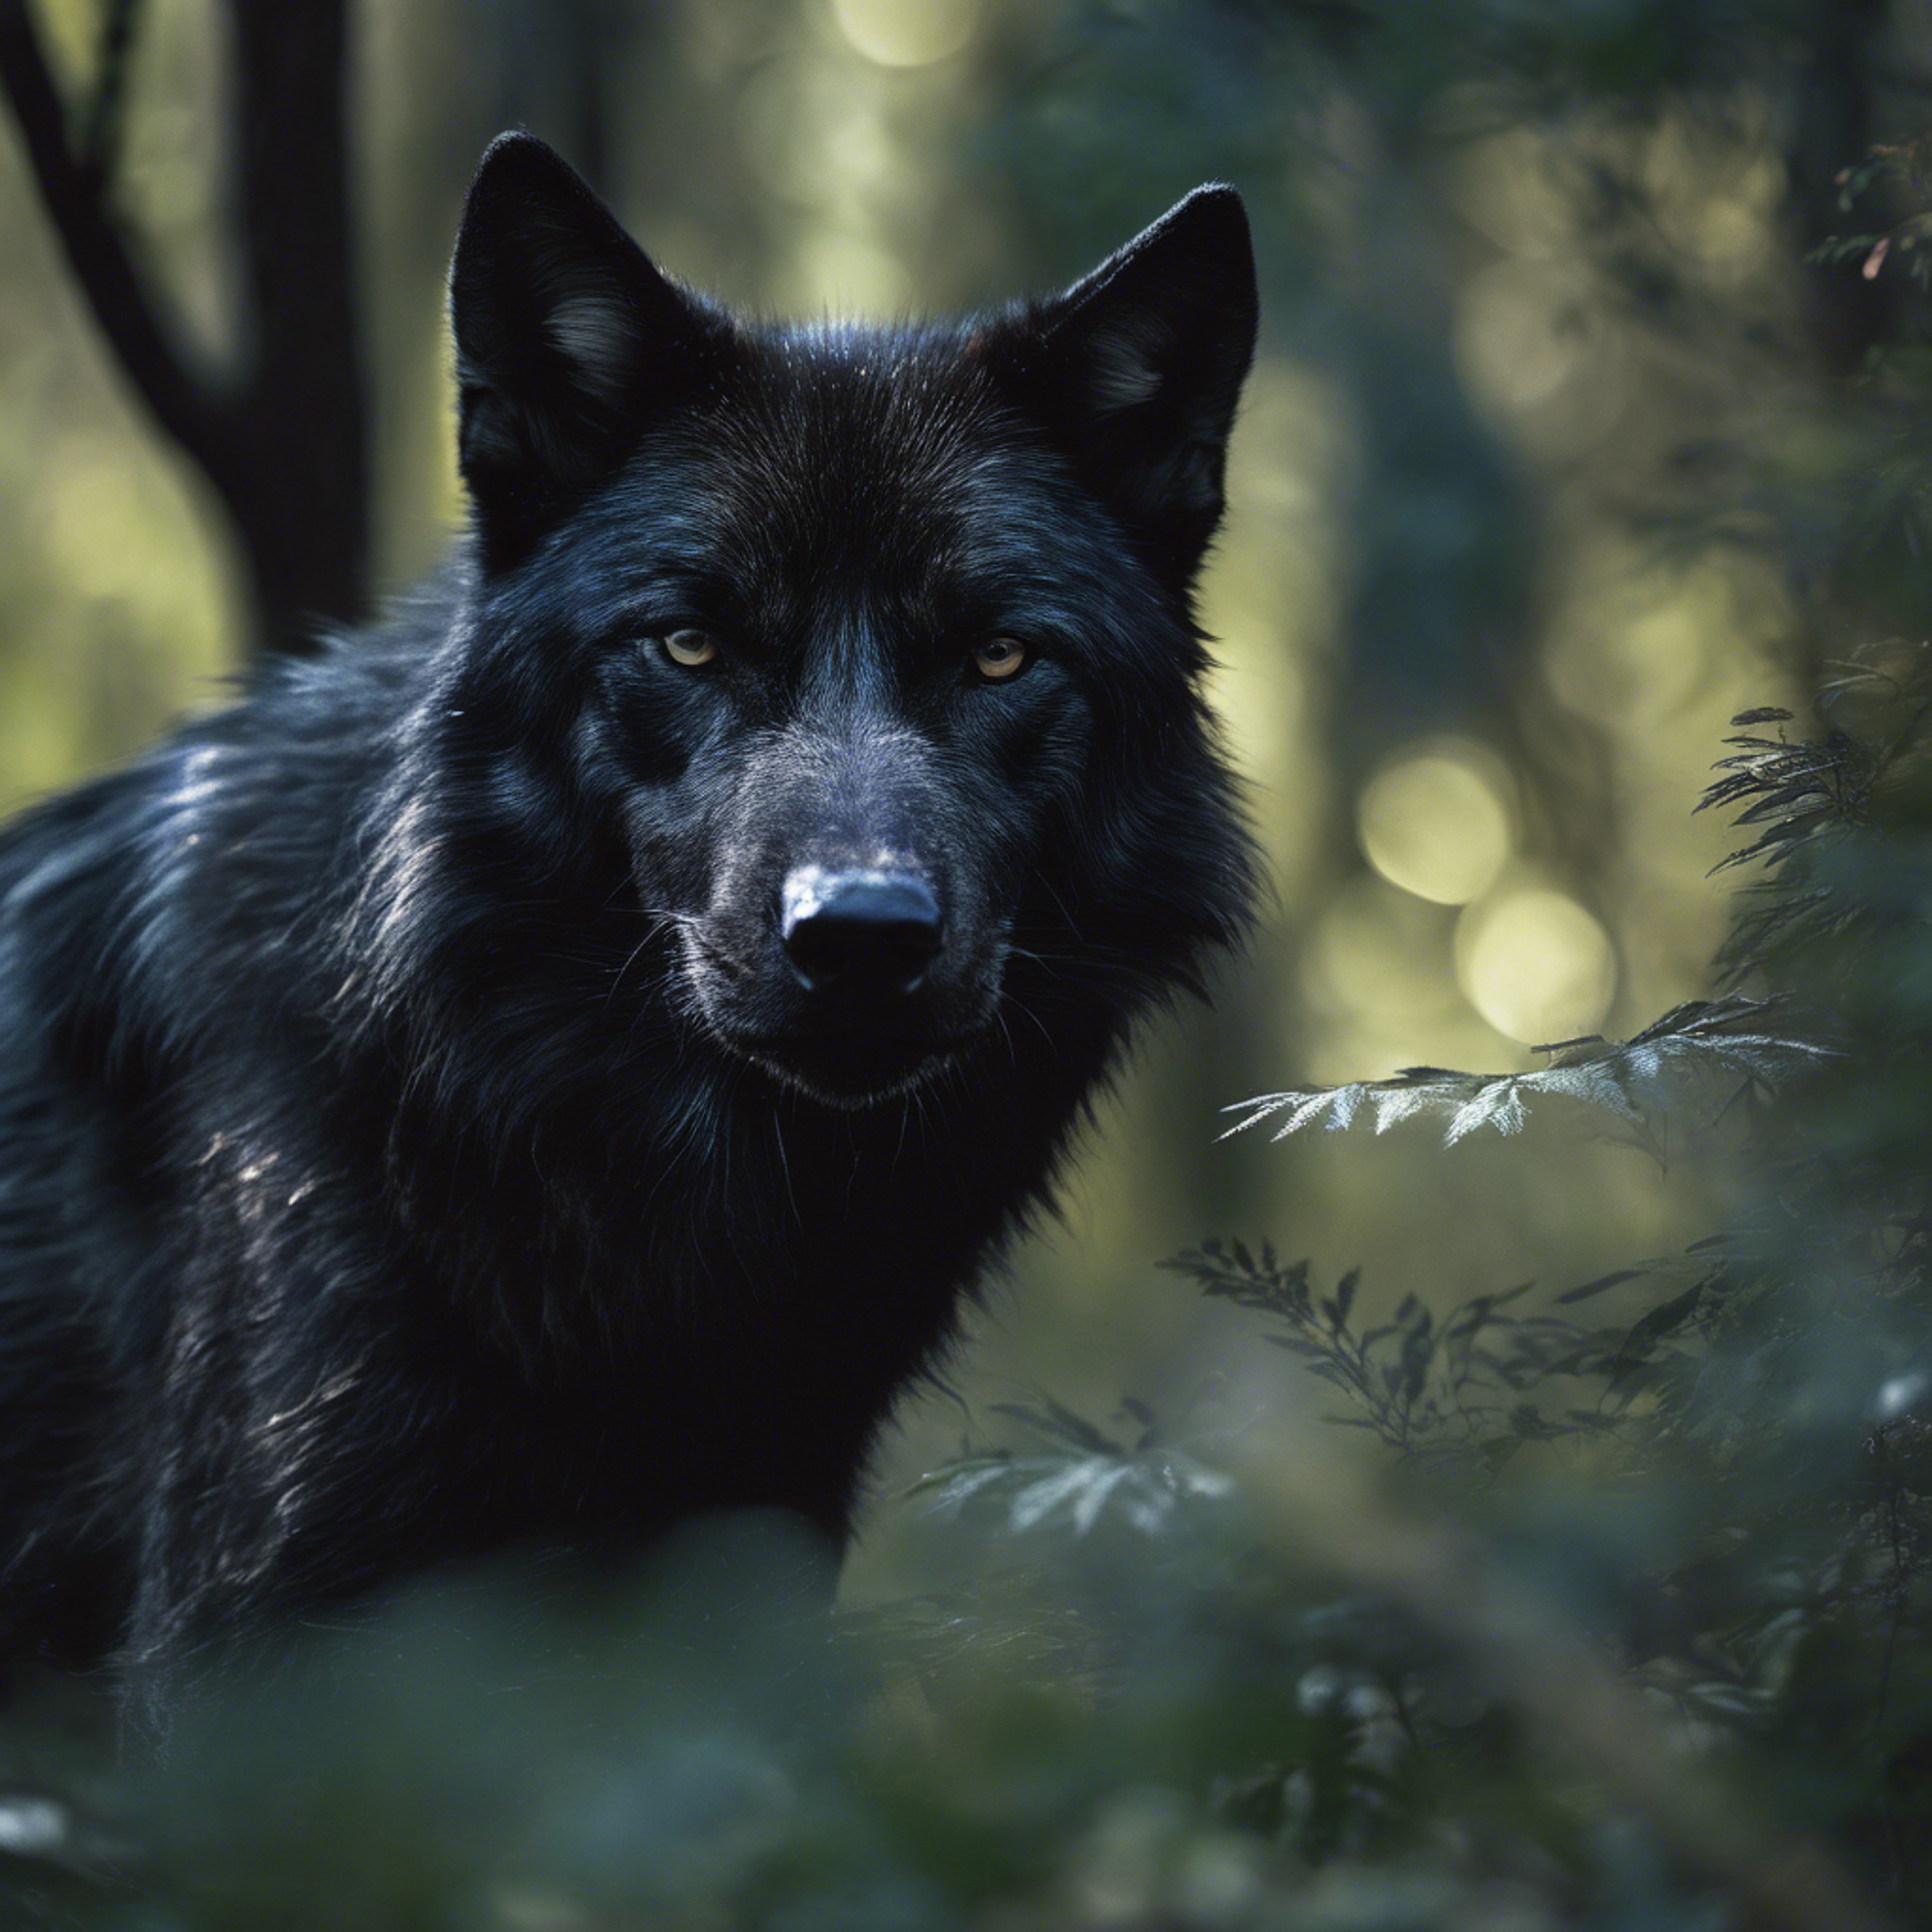 A black wolf camouflaged in the shadowy shades of a dense forest, ready to pounce on prey. Papel de parede[8e2c23357bd04da18408]